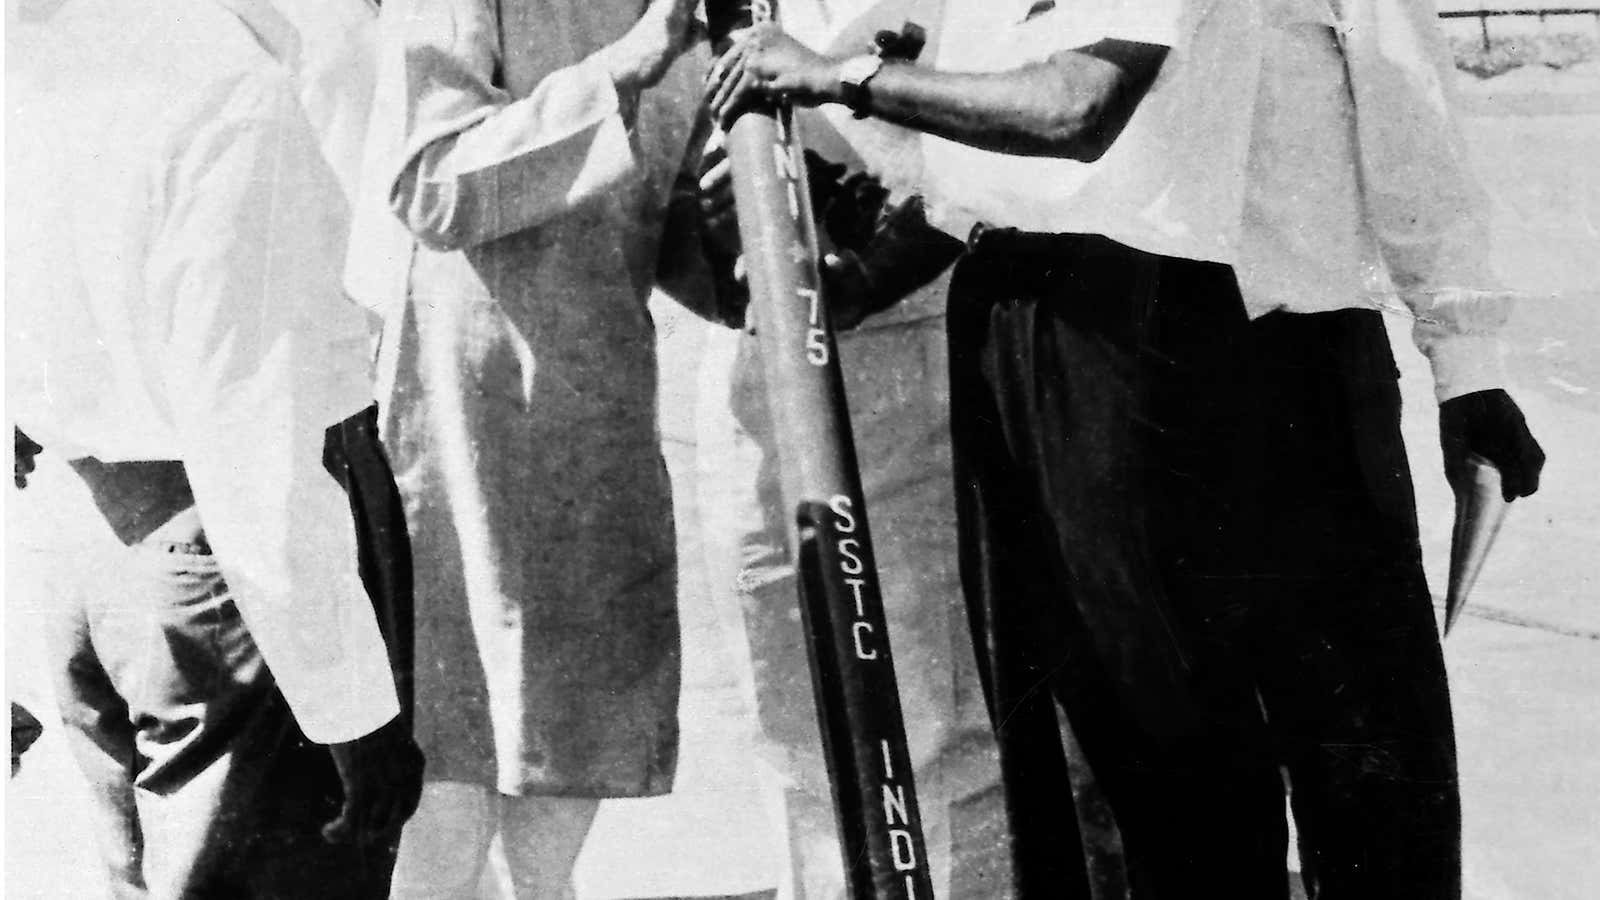 The very first indigenous rocket made by ISRO was known as RH-75 (RH stands for Rohini and 75 refers to the diameter of the rocket in mm). It was made from readily available extruded aluminium alloy tubes from the market. YJ Rao (with spectacles) is showing Sarabhai the RH-75.